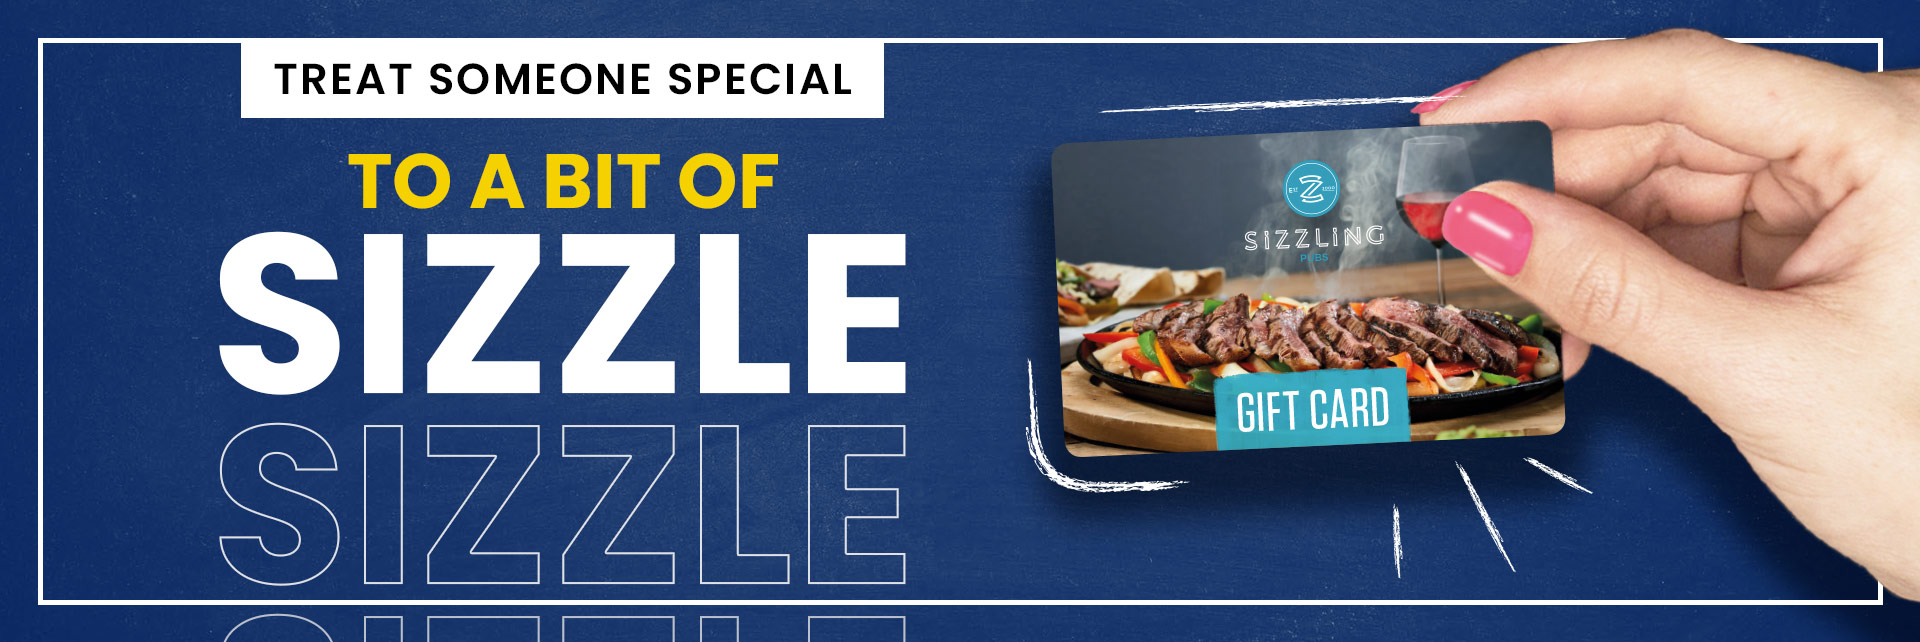 Sizzling Pubs Gift Card at The Court Oak in Birmingham